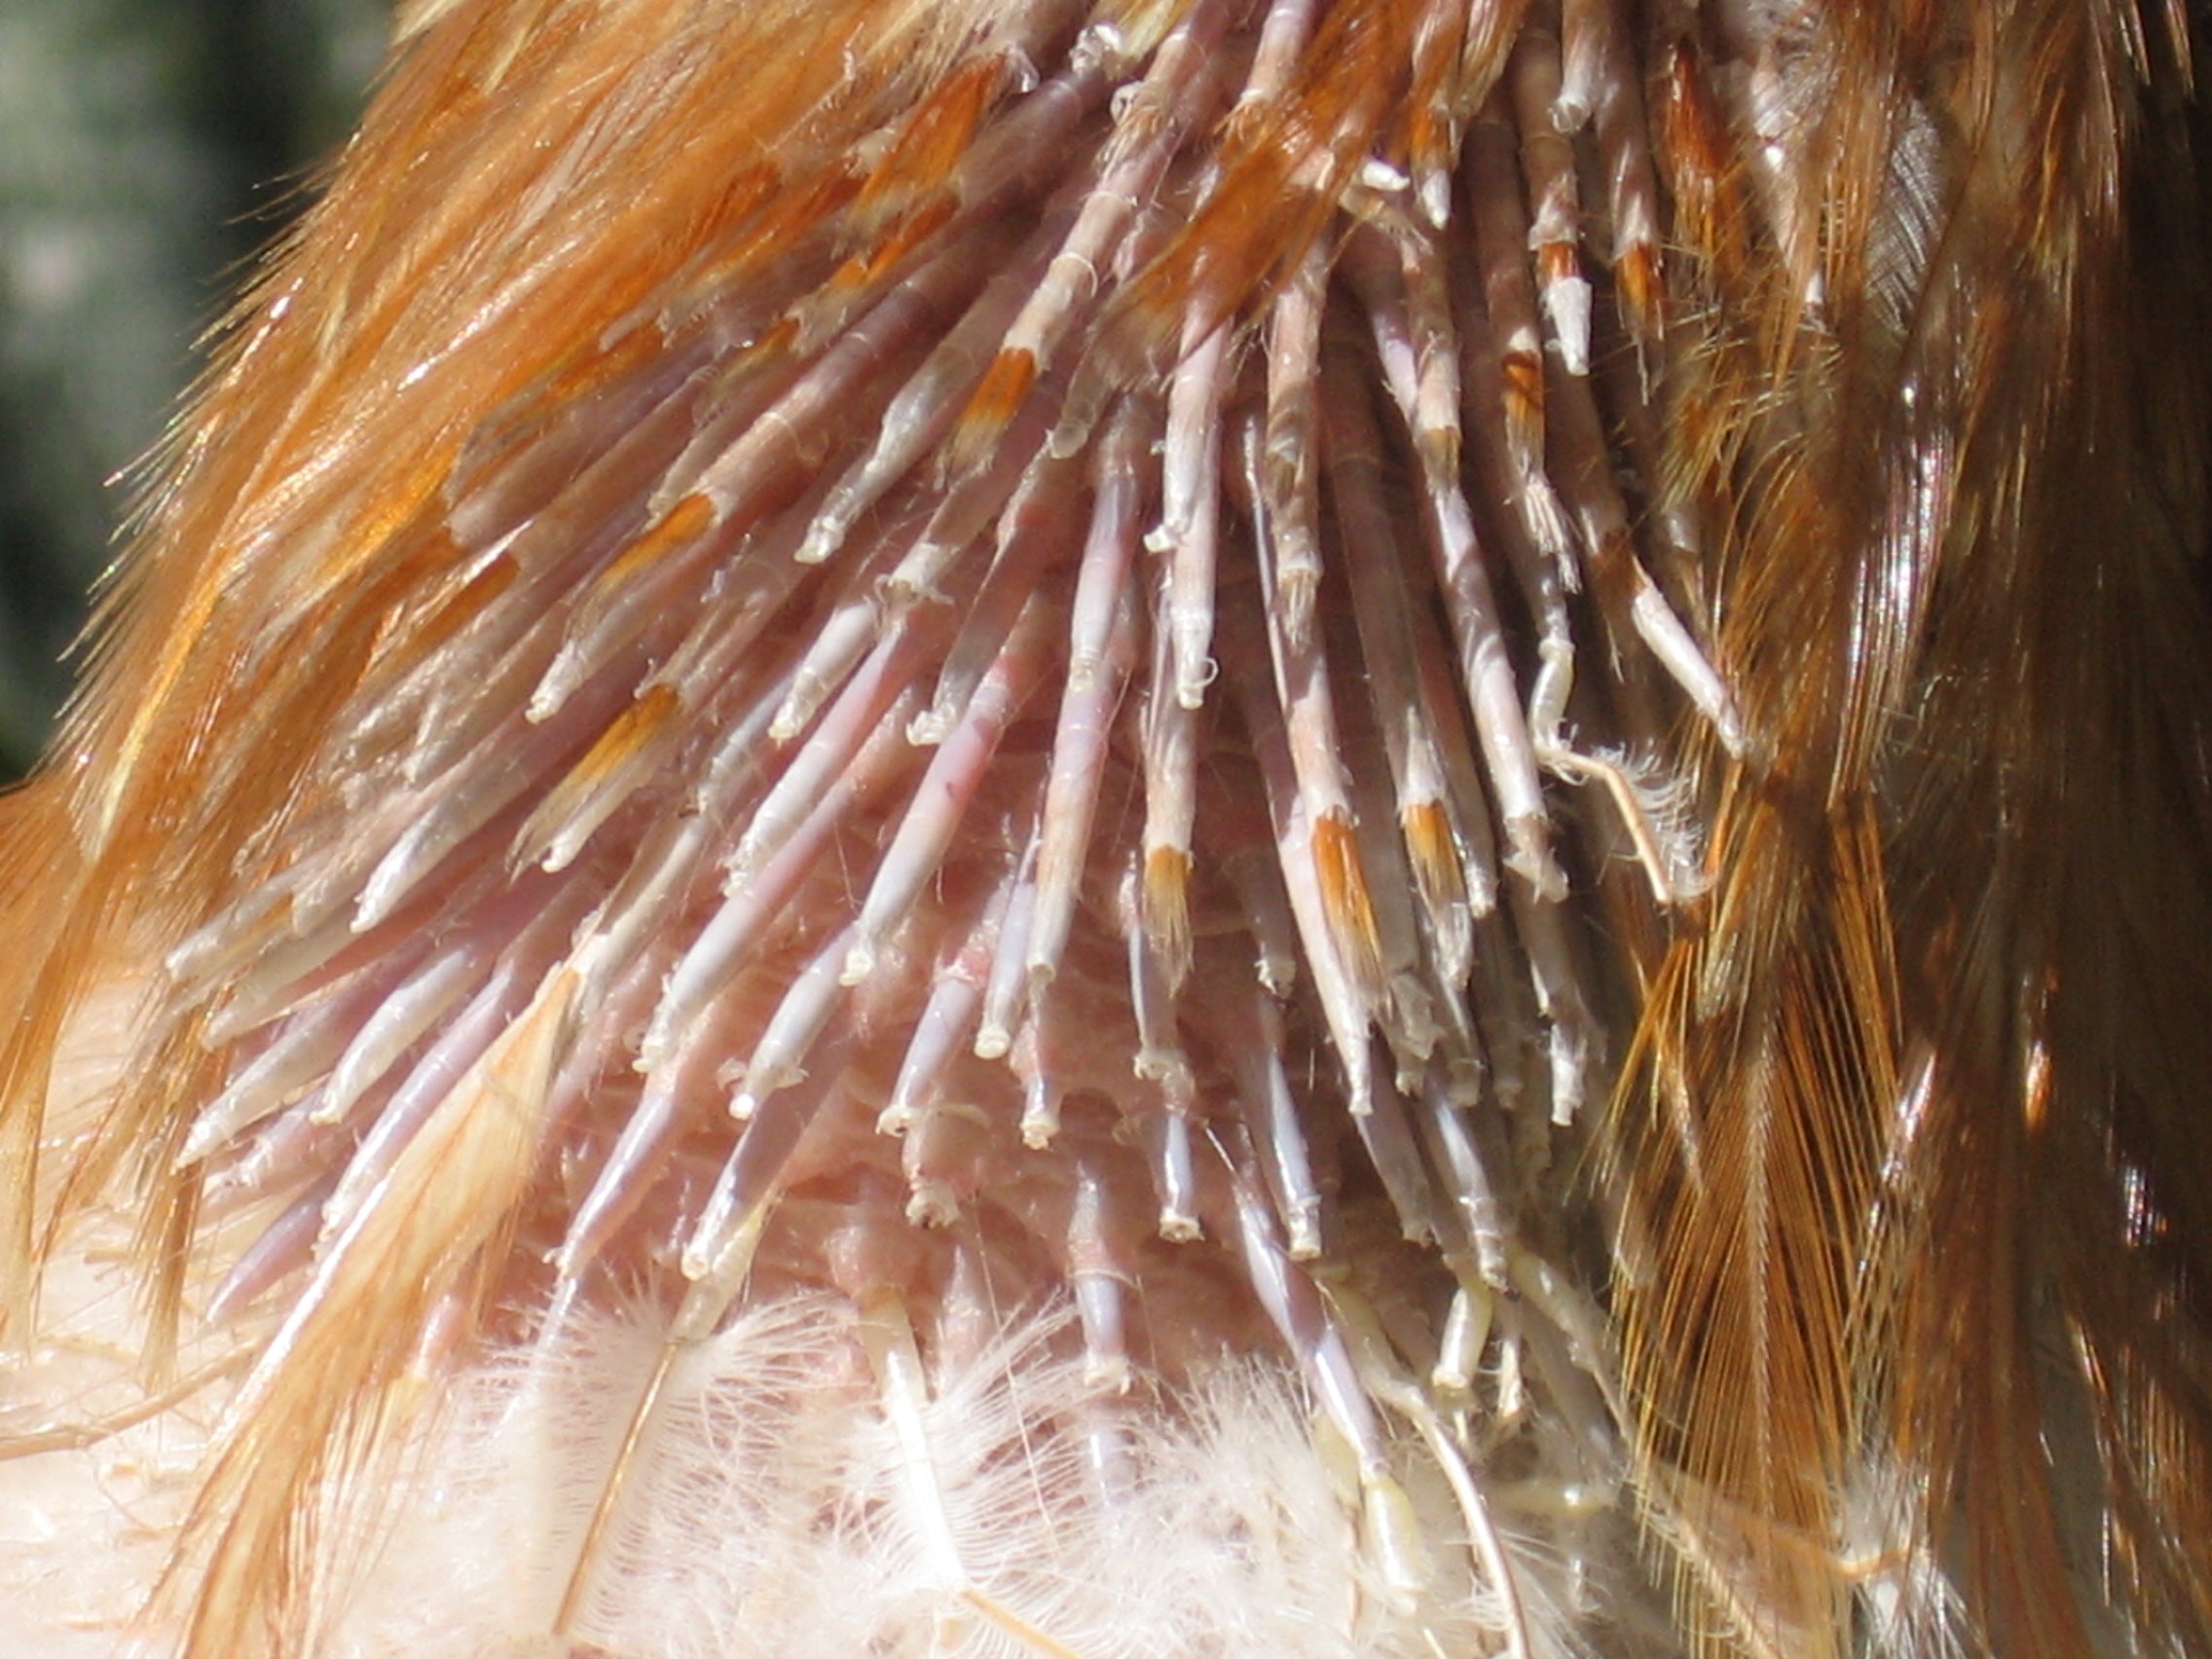 Normally, under natural conditions, moulting in adult birds will occur once a year